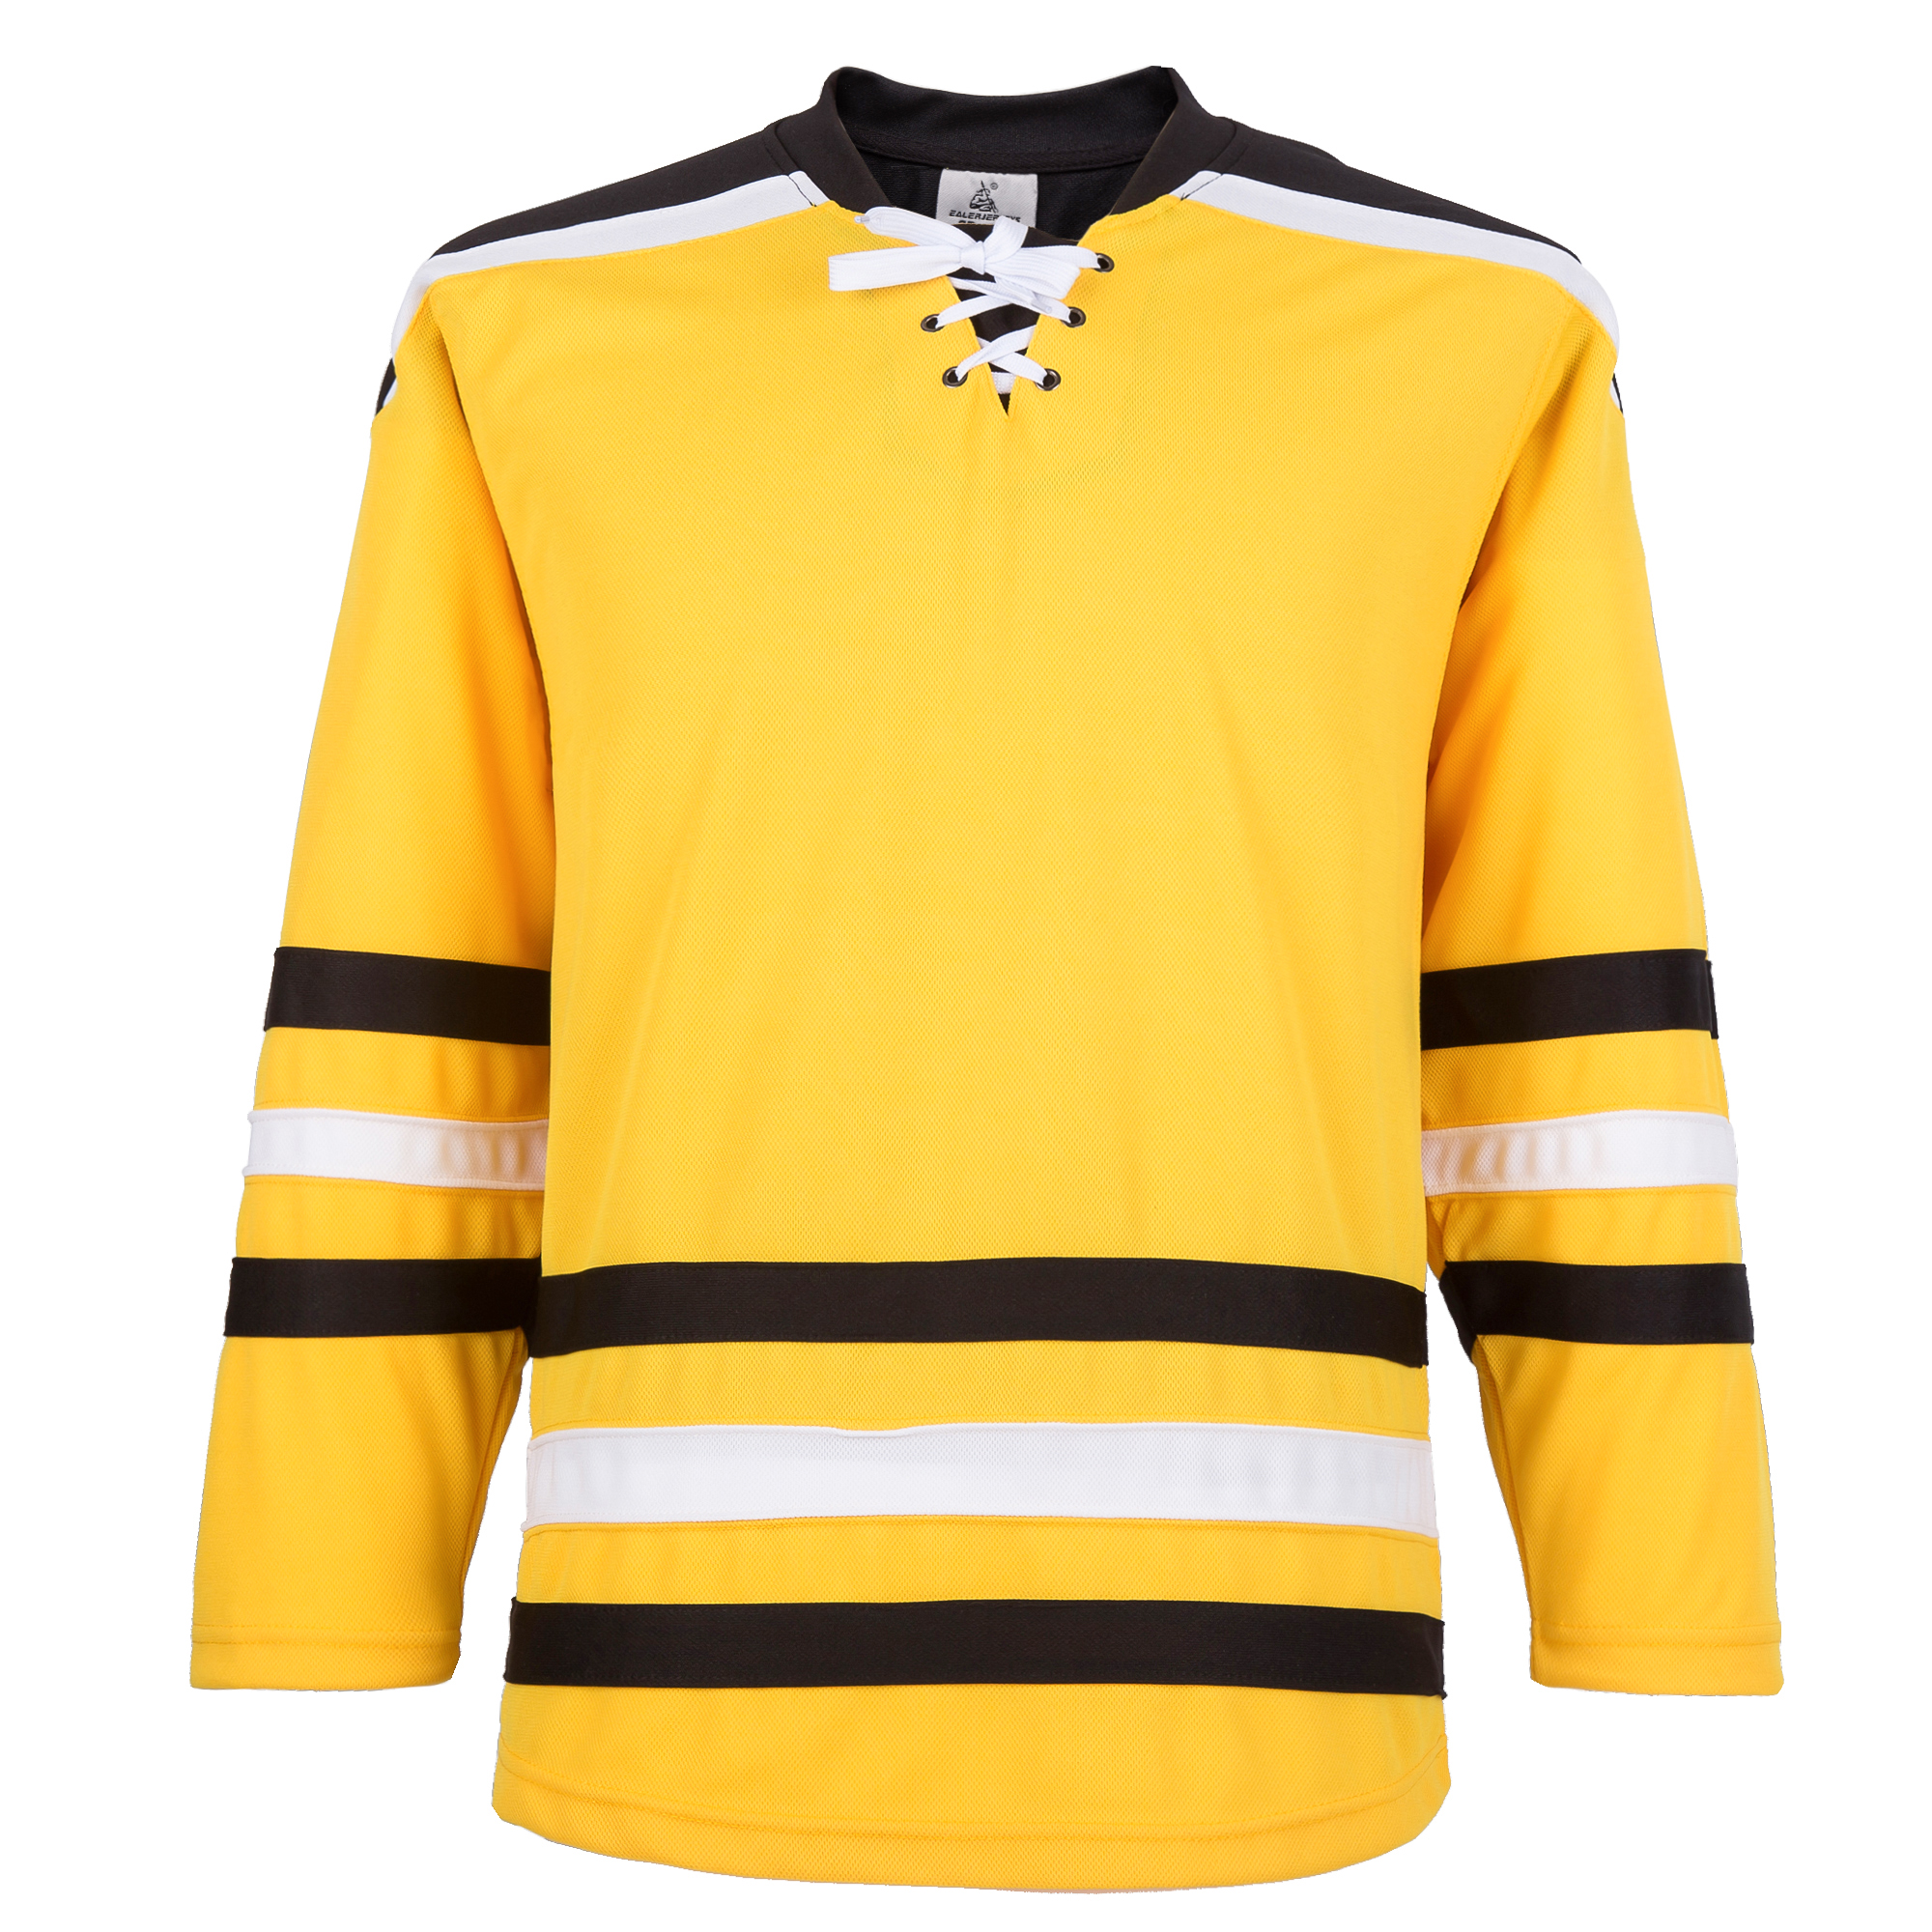 EALER H900-CA Series Hockey Team Blank Practice Jersey&Thick Breathable and Quick-Dry Fabric&Unisex Junior to Senior 